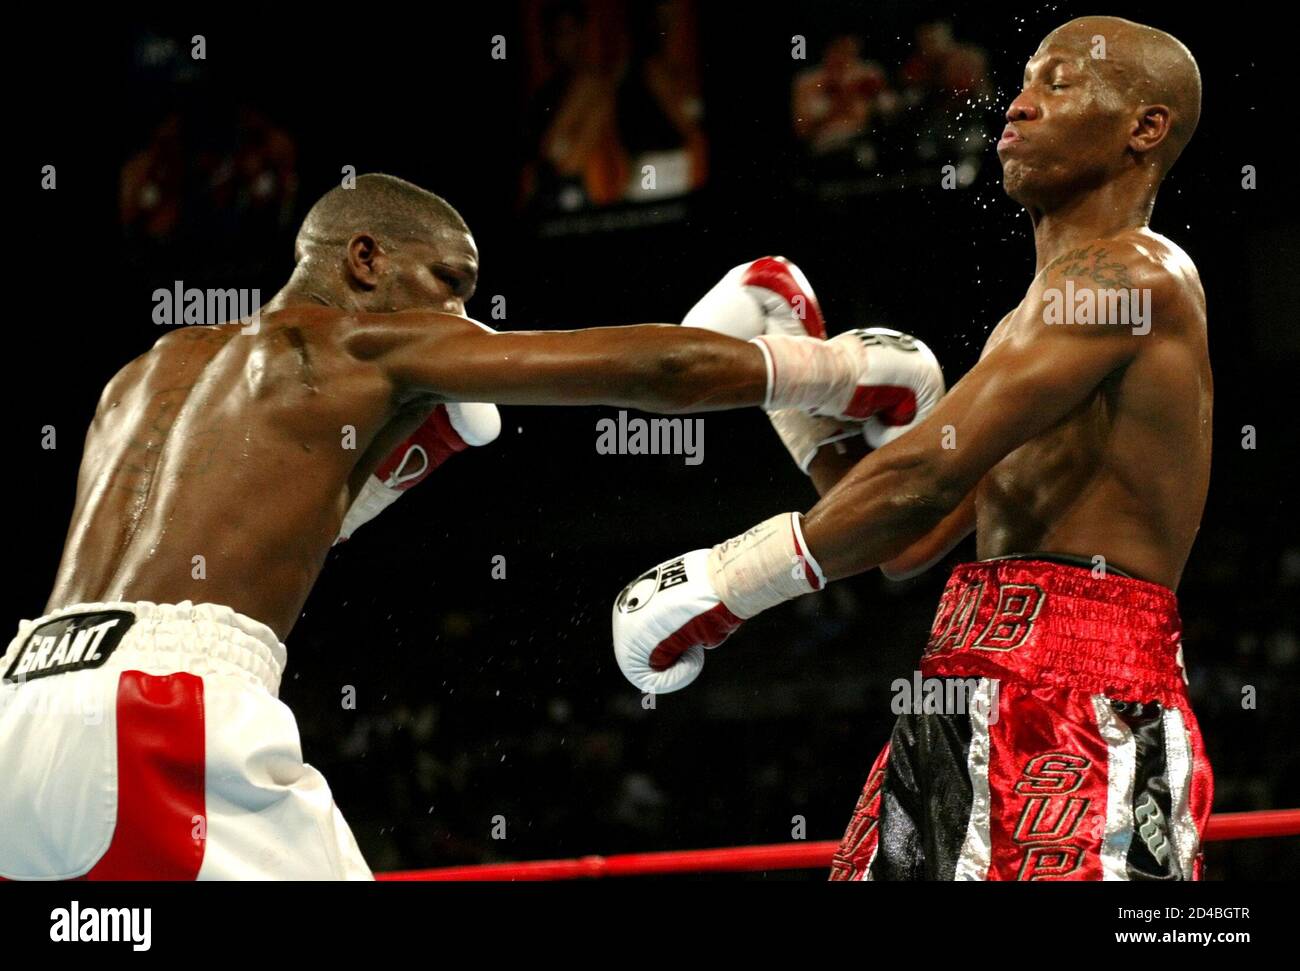 Undisputed welterweight champion Cory Spinks (L) of St. Louis, Missouri connects with a punch on Zab Judah of Brooklyn, New York during the fourth round of their 12-round title fight at the Mandalay Bay Events Center in Las Vegas, Nevada, April 10, 2004. Spinks retained his WBC/WBA/IBF titles by unanimous decision. Stock Photo